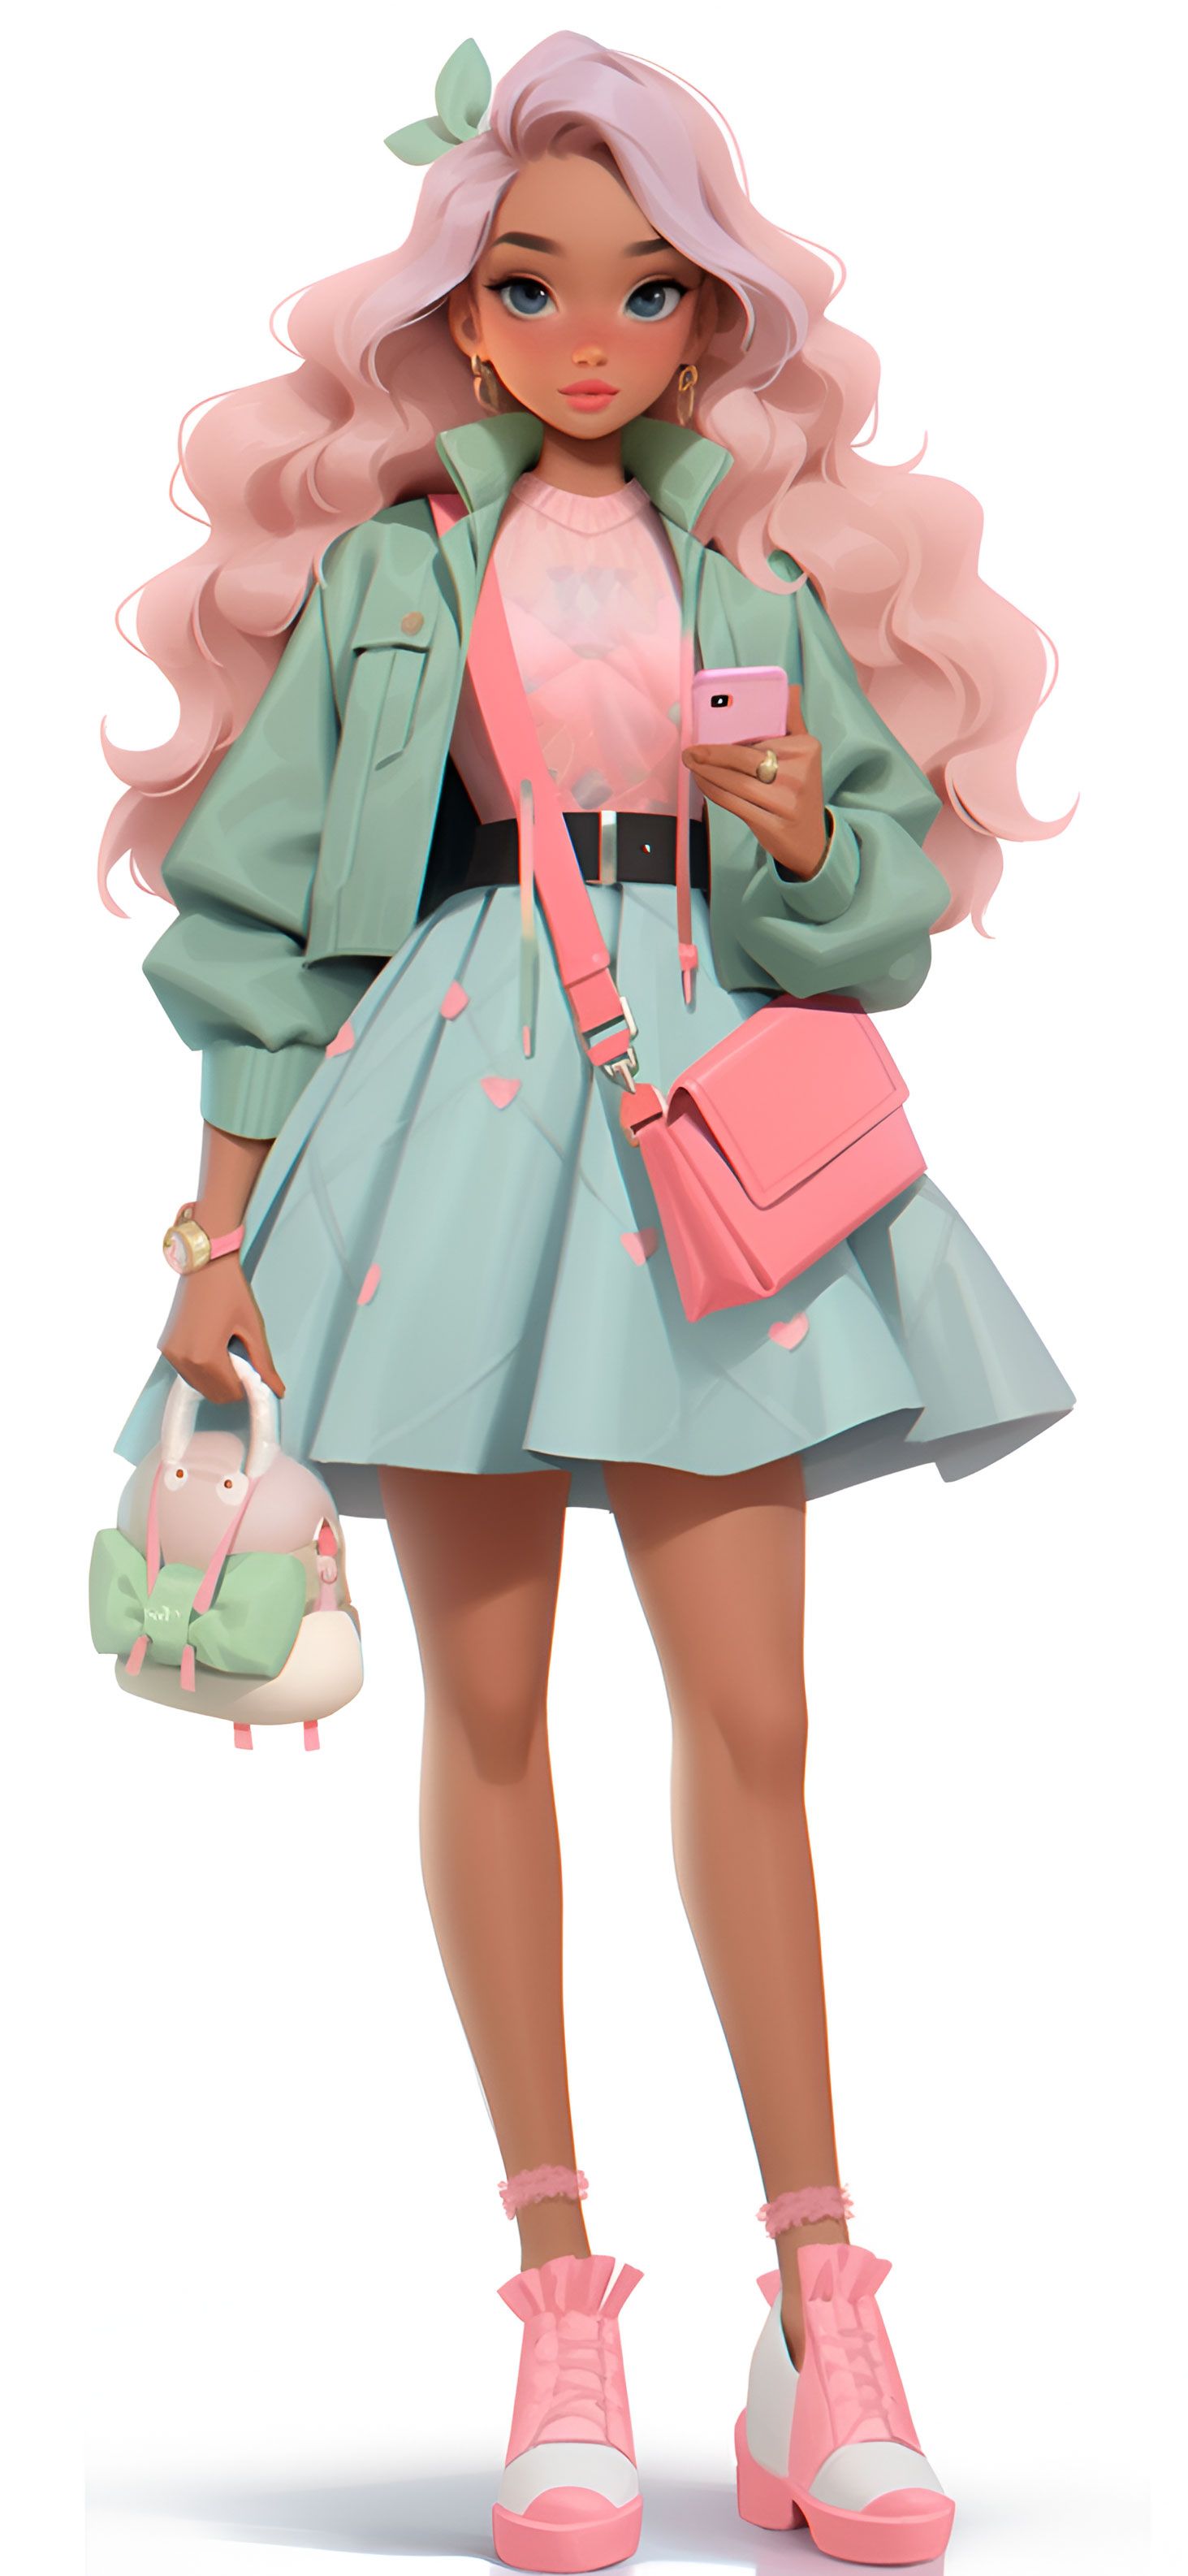 A character with pink hair, wearing a pink and mint outfit and holding a phone and a backpack. - Barbie